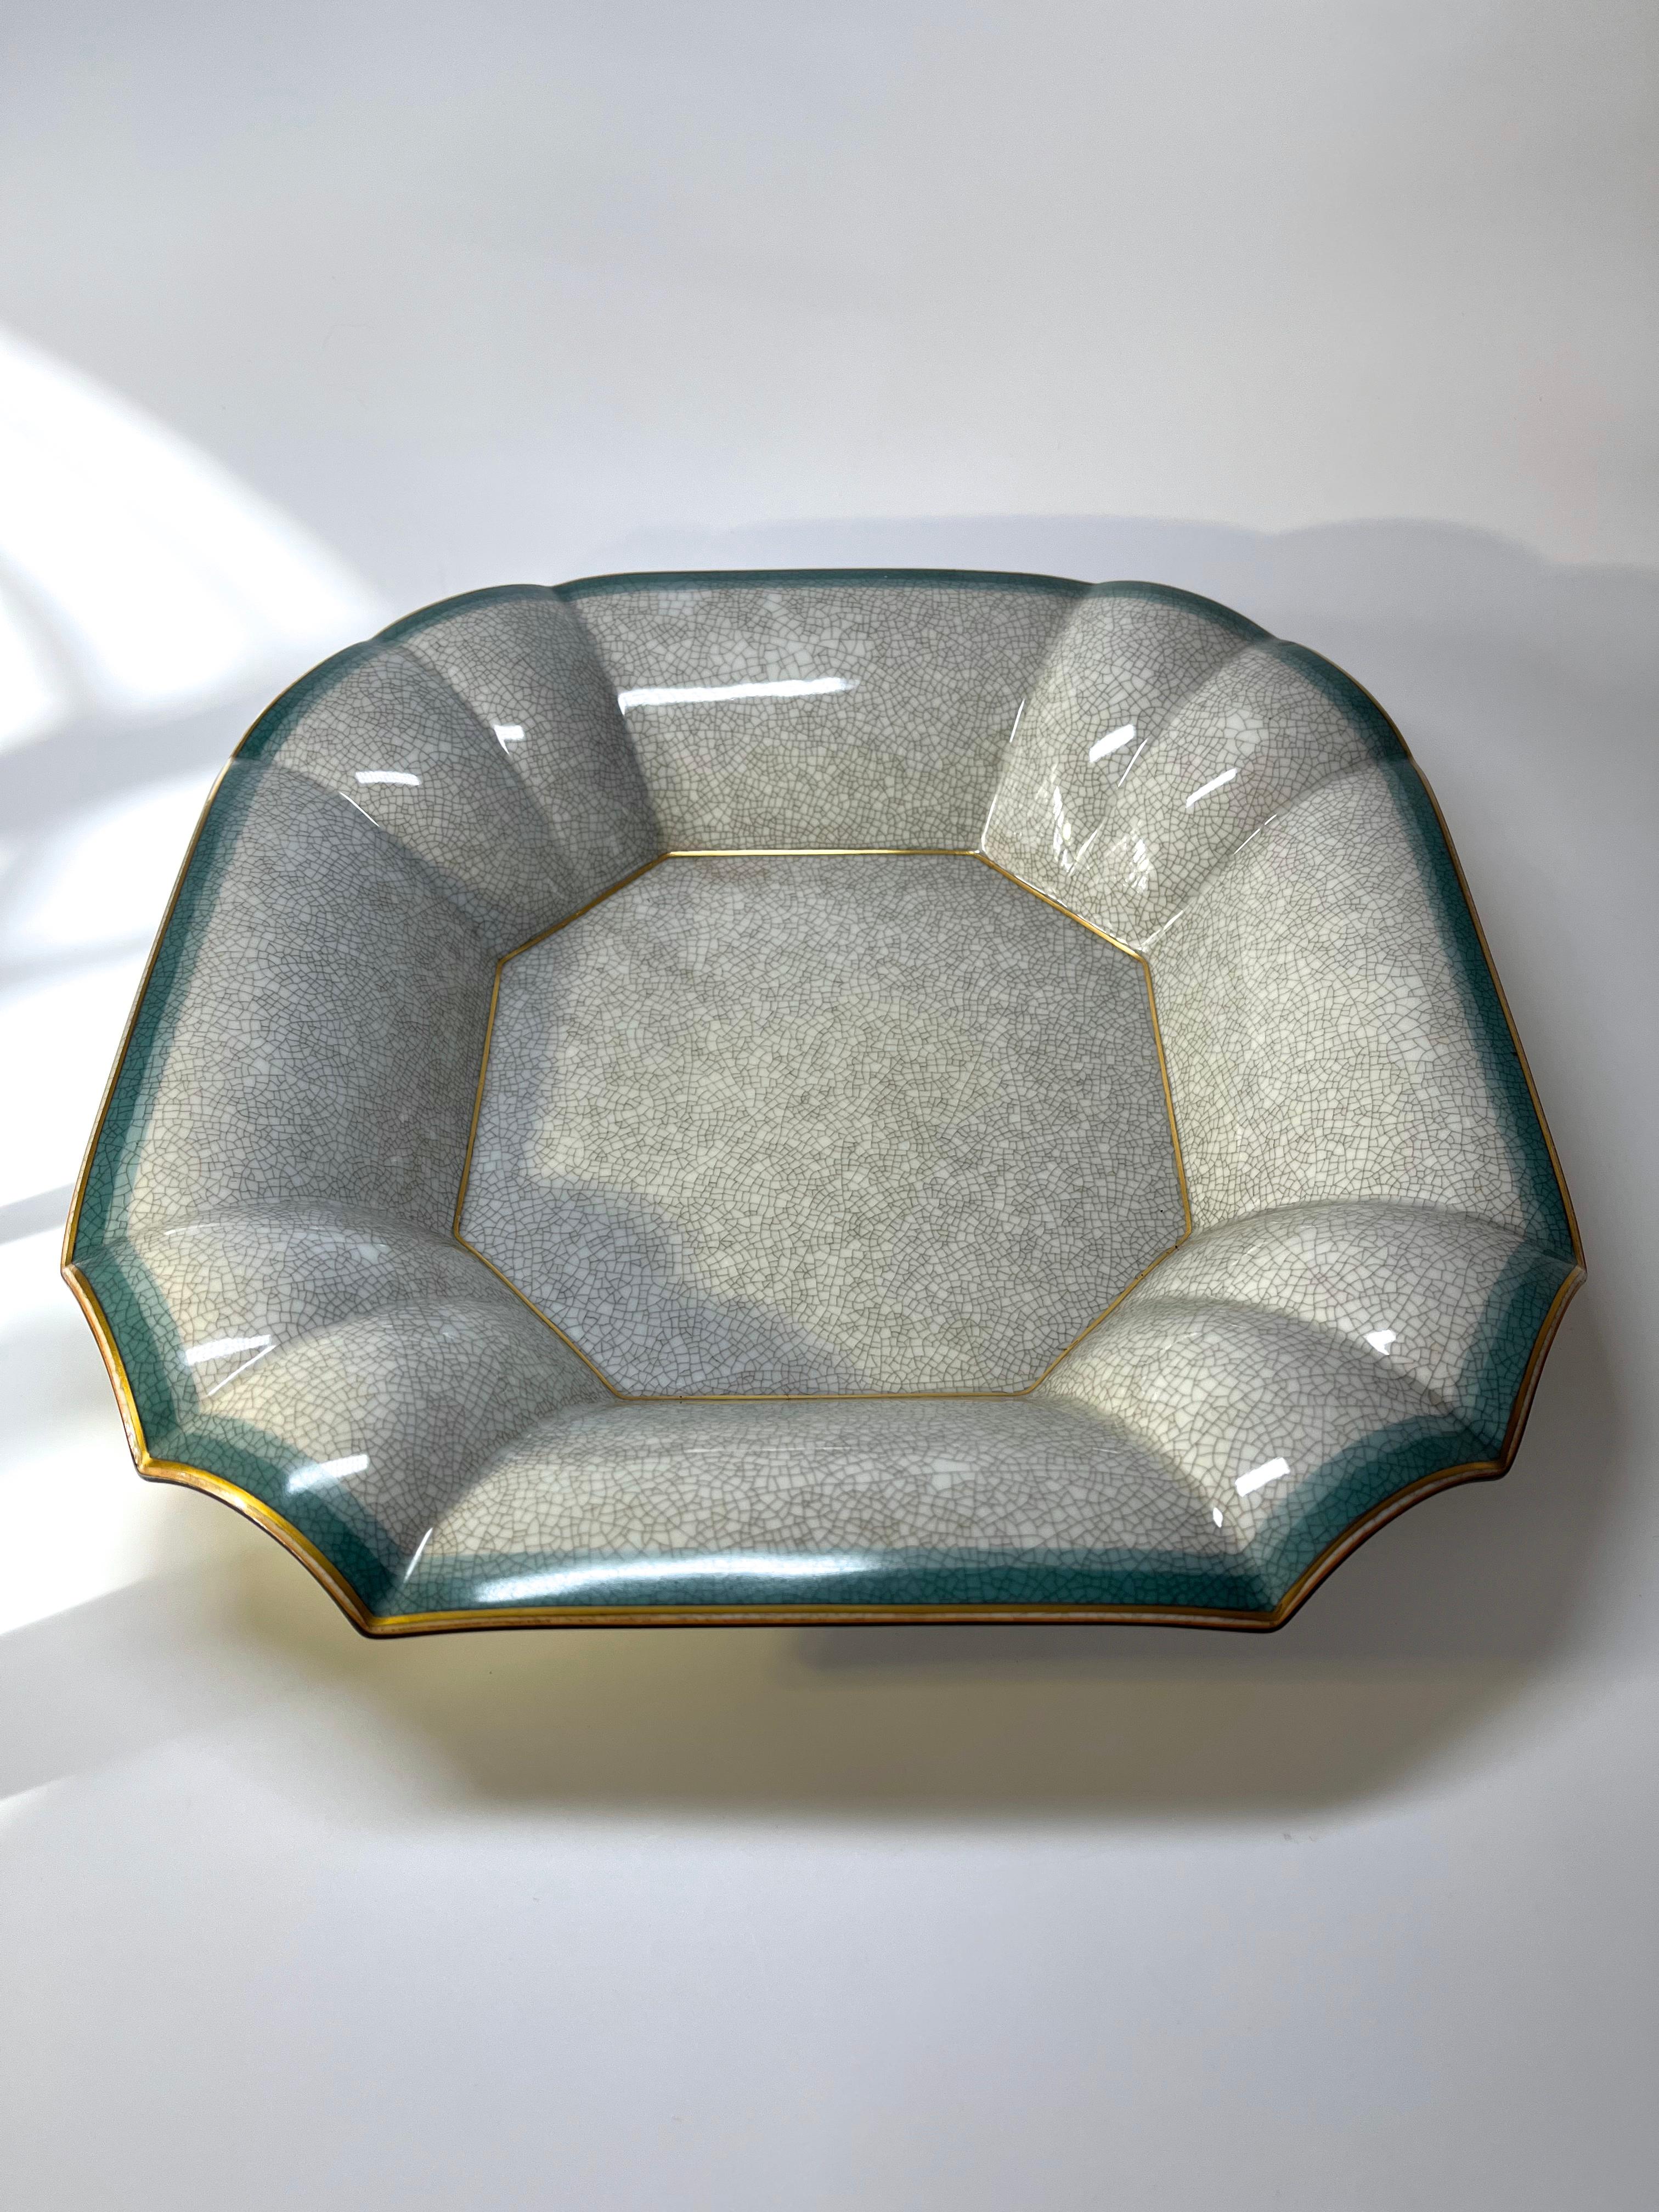 Thorkild Olsen Beautiful Tones Of Teal & Grey, Crackle Glazed Dual Purpose Bowl  In Excellent Condition For Sale In Rothley, Leicestershire